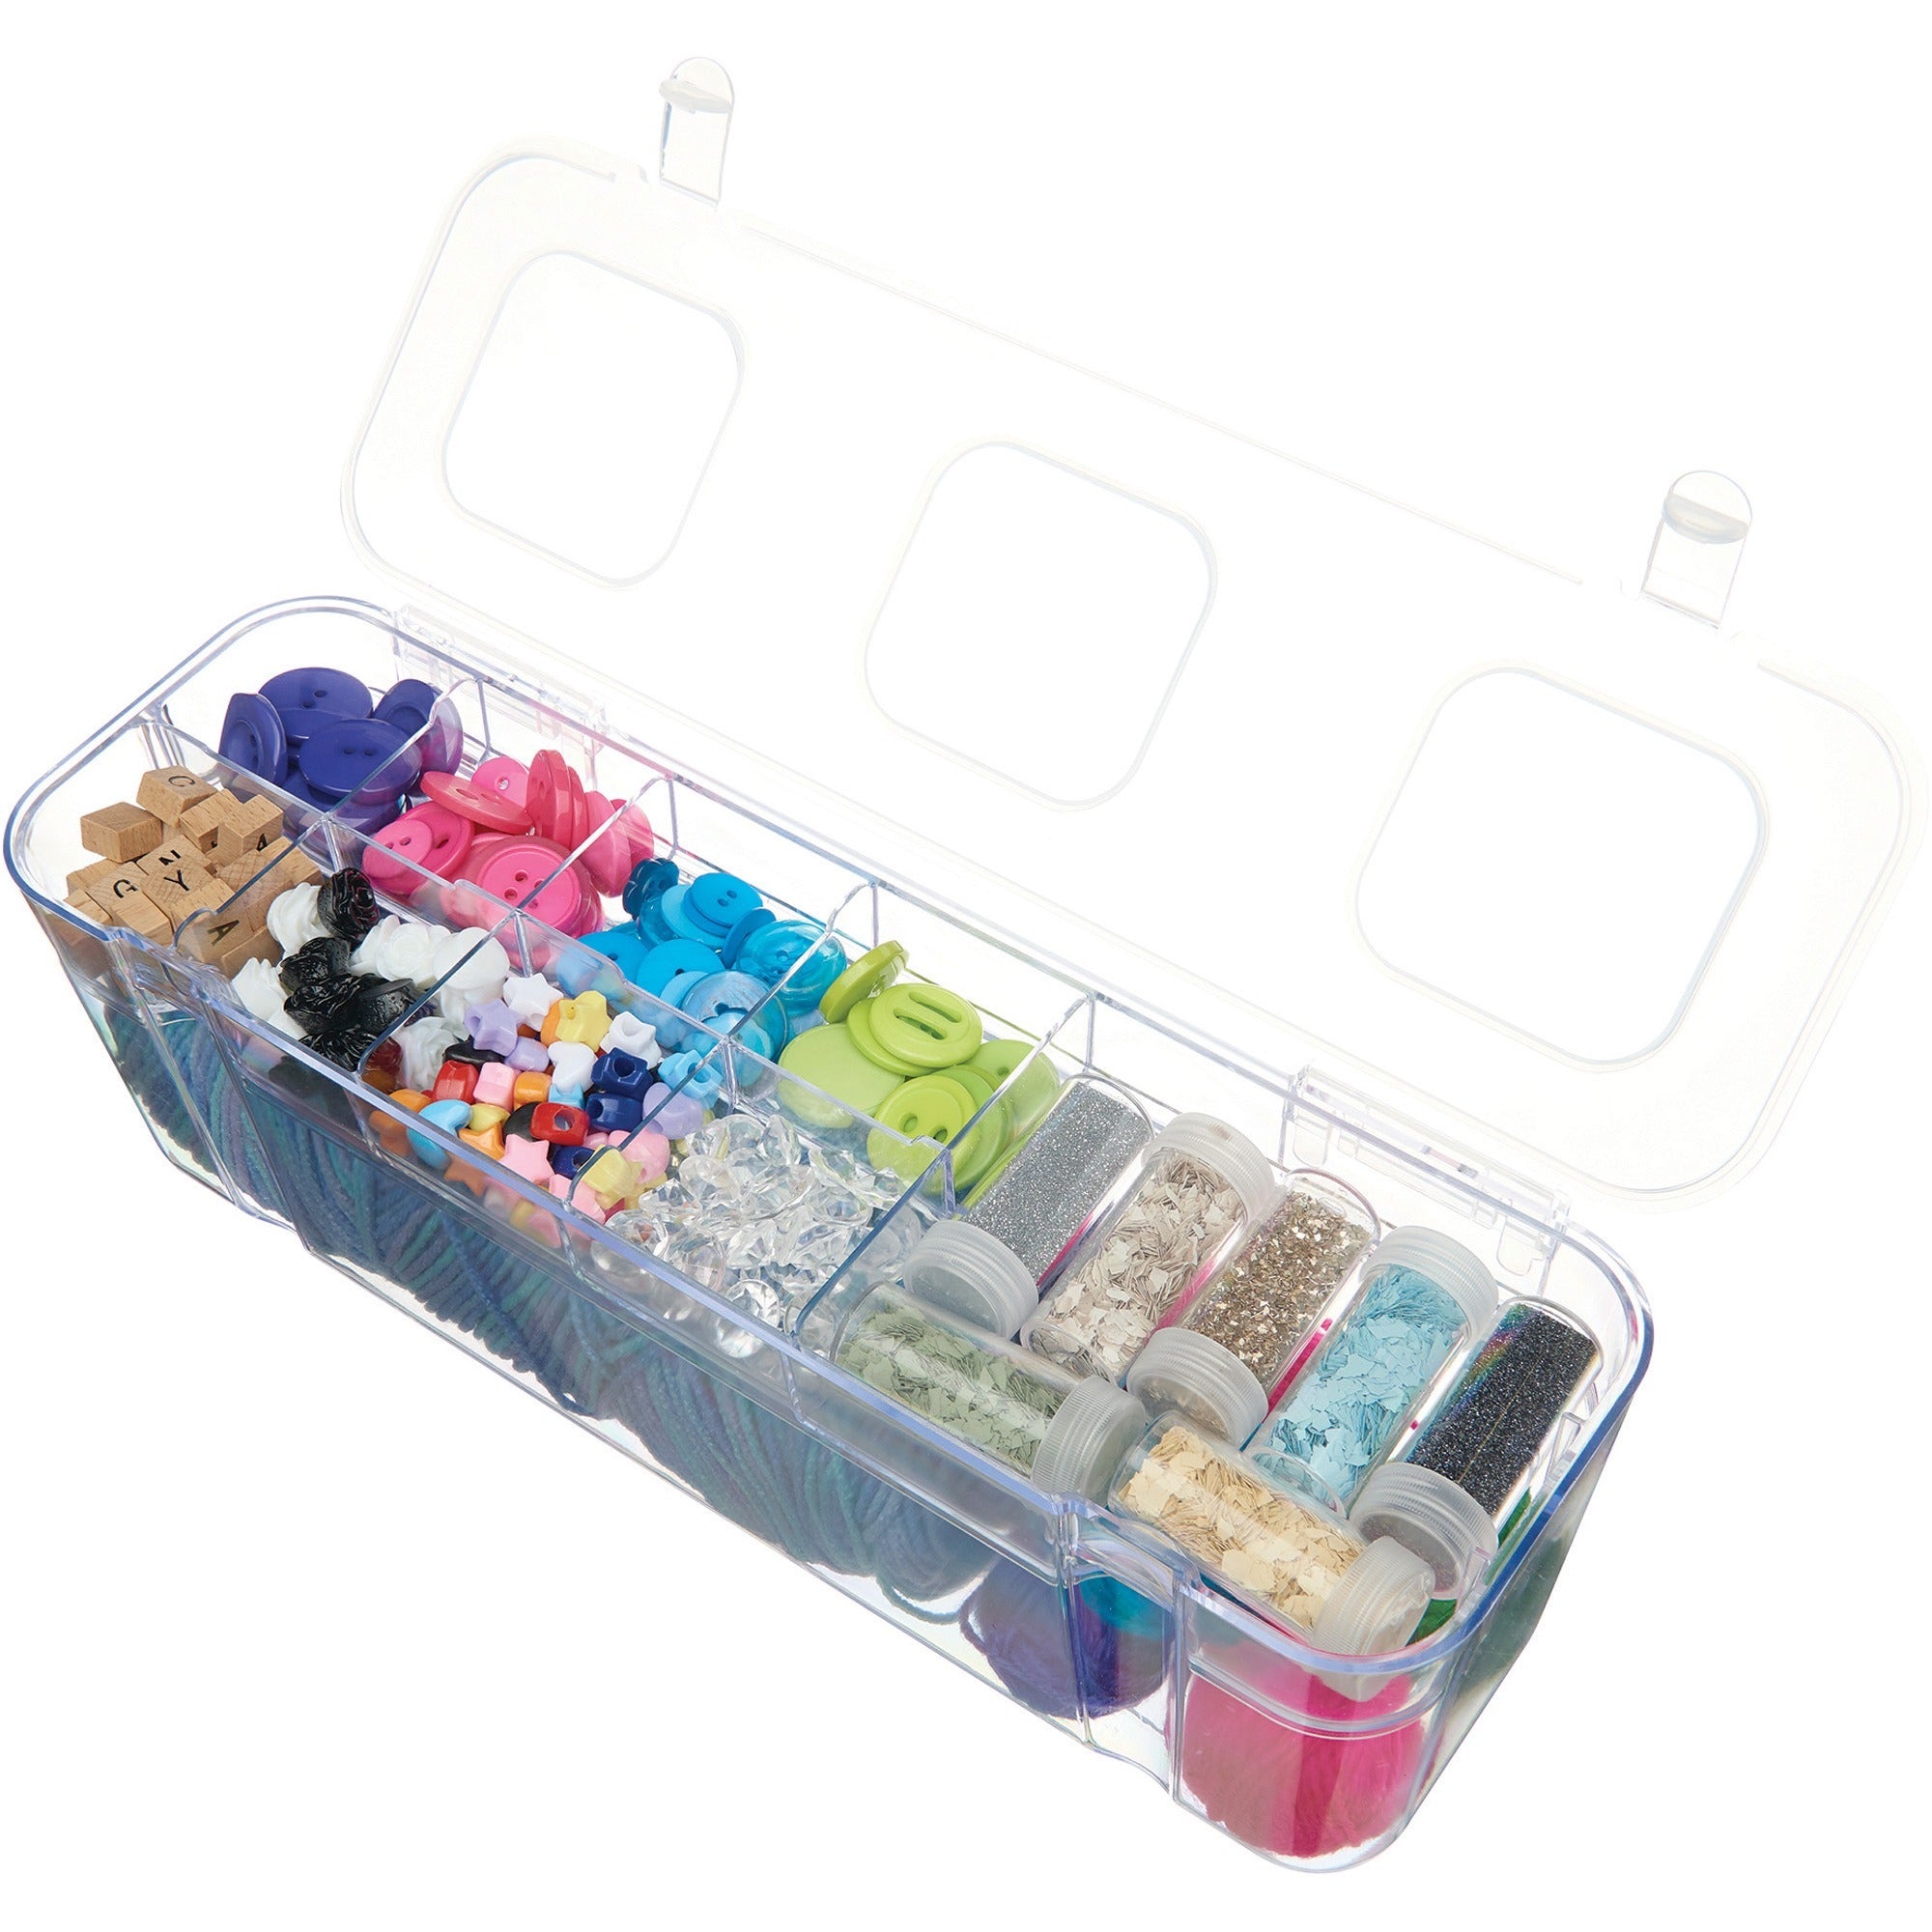 deflecto-caddy-storage-tray-9-compartments-13-height-x-131-width-x-38-depthdesktop-portable-stackable-clear-polystyrene-1-each_def29311cr - 2